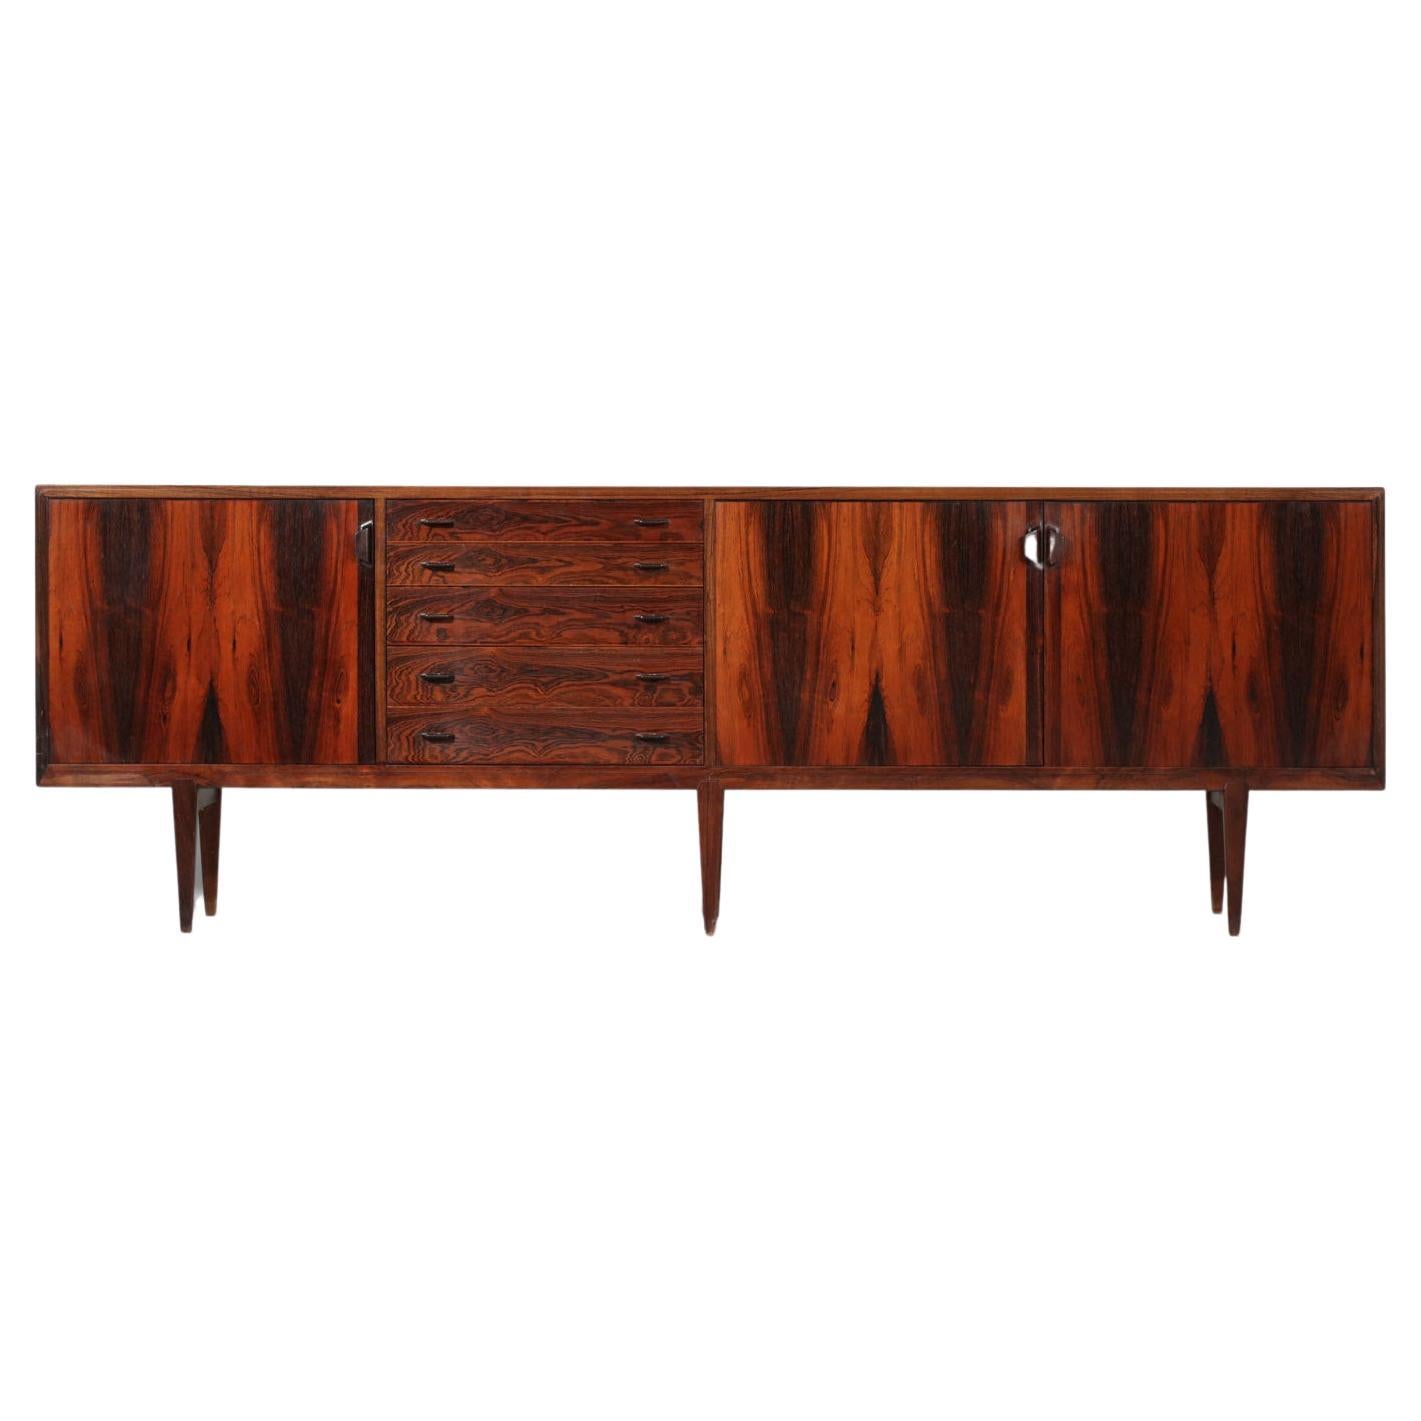 Large Scandinavian sideboard by Danish designer Henry Rosengren Hansen from the 60's for Brande Mobelindustri. Structure in solid and veneered Rio rosewood. The enfilade consists of three swinging doors with four height adjustable interior shelves